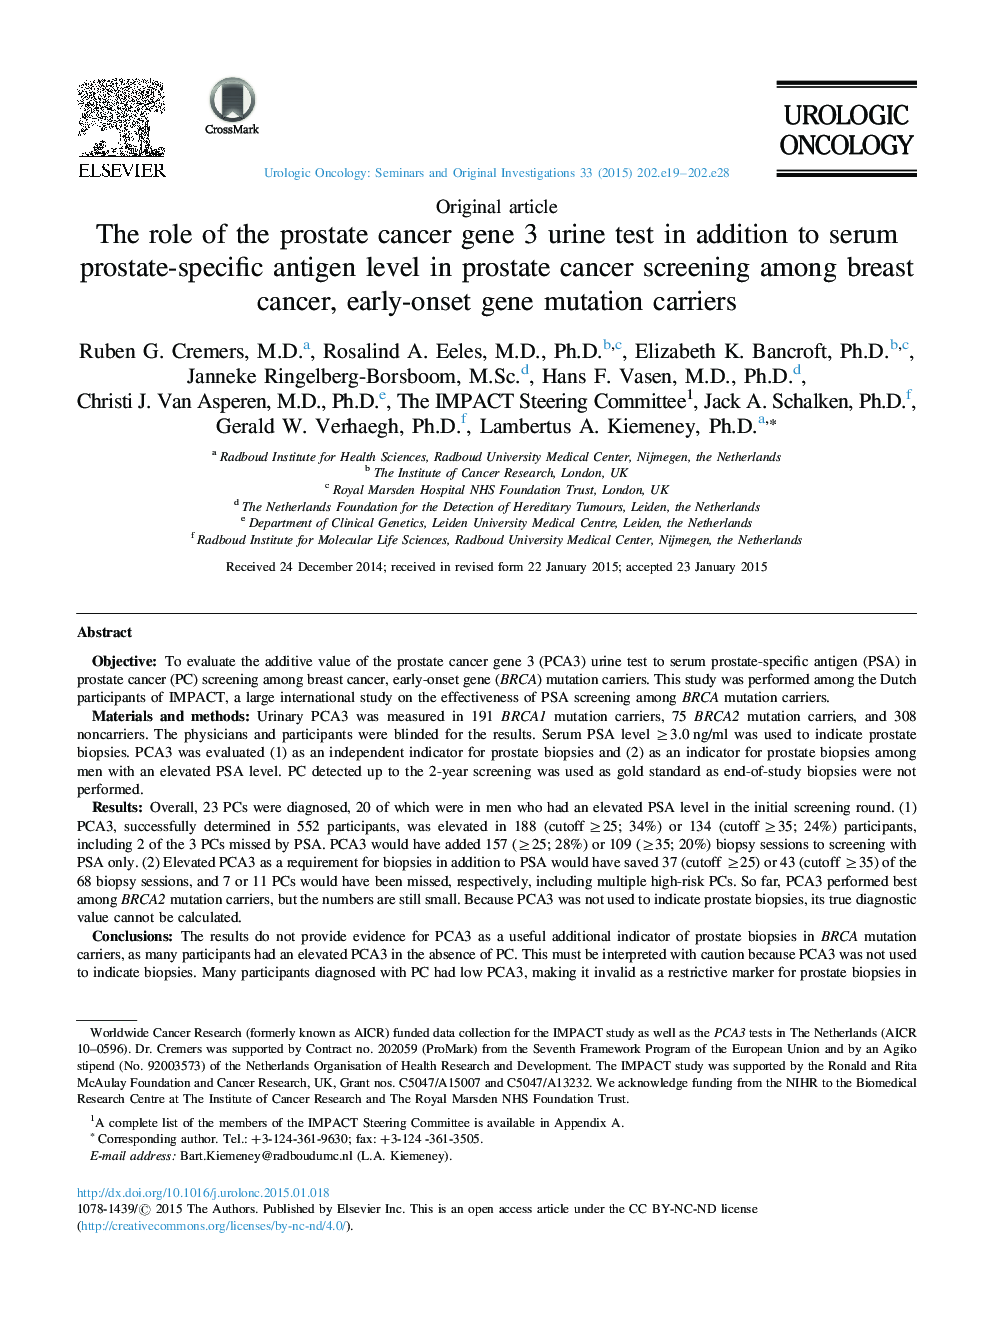 The role of the prostate cancer gene 3 urine test in addition to serum prostate-specific antigen level in prostate cancer screening among breast cancer, early-onset gene mutation carriers